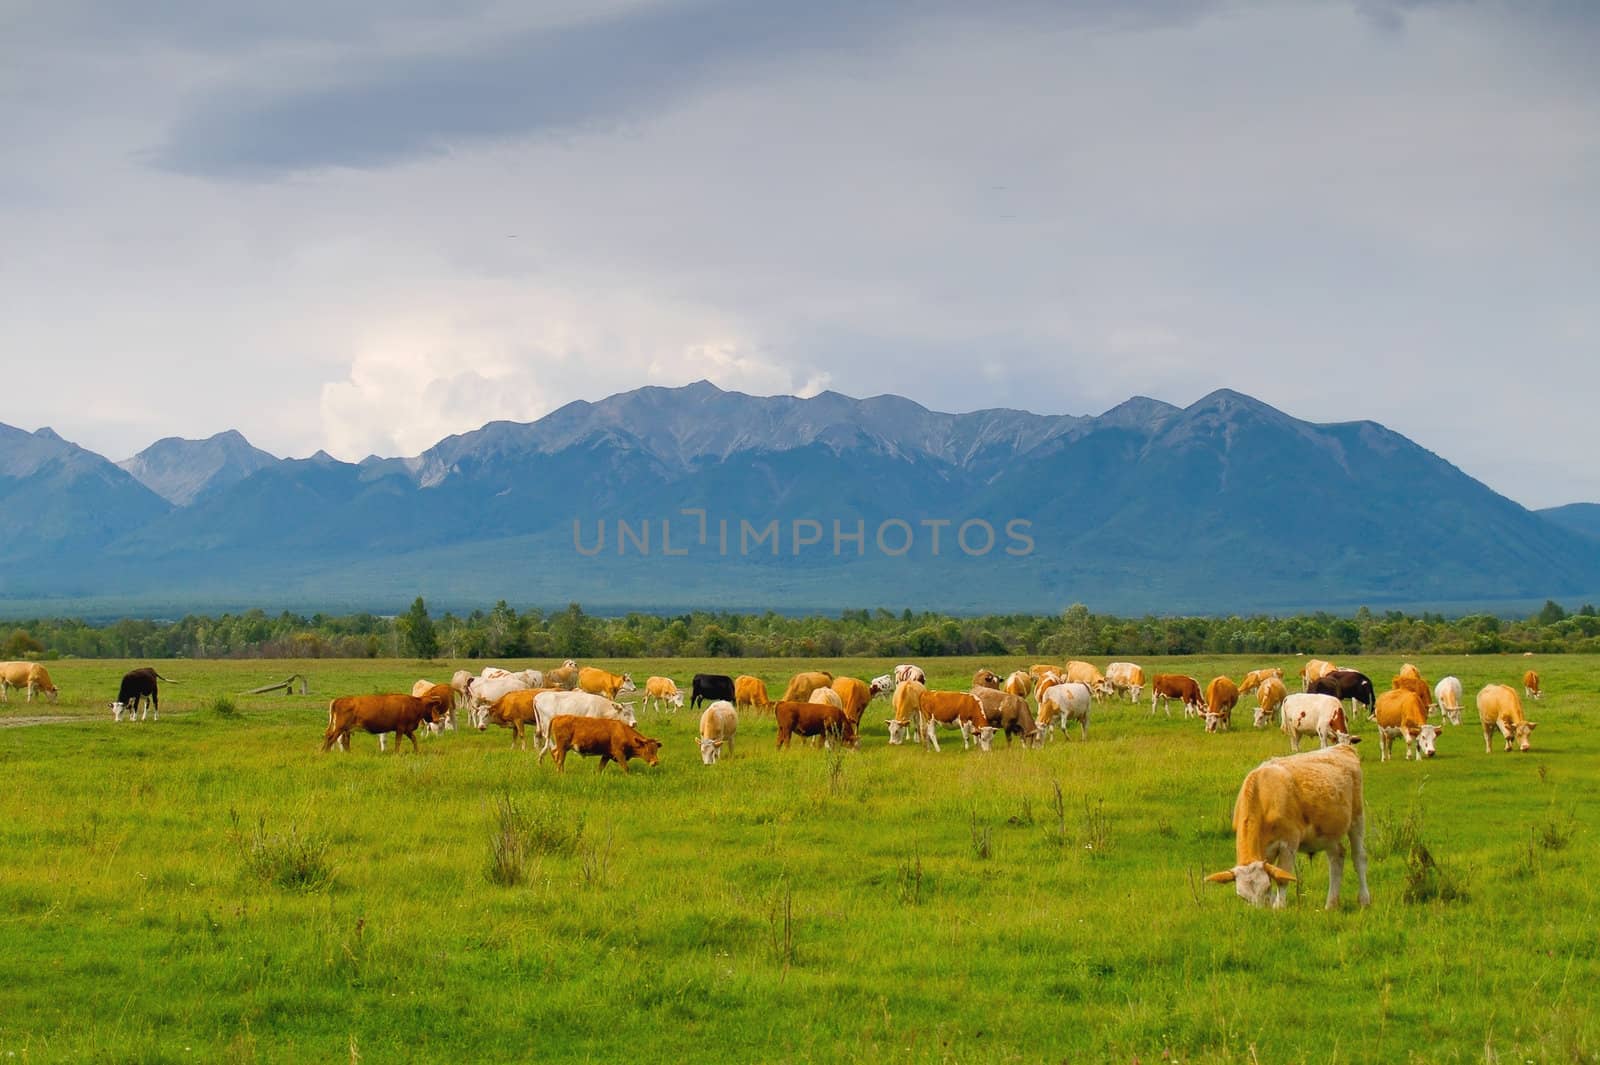 Herd on mountains background. Bright and saturated image.